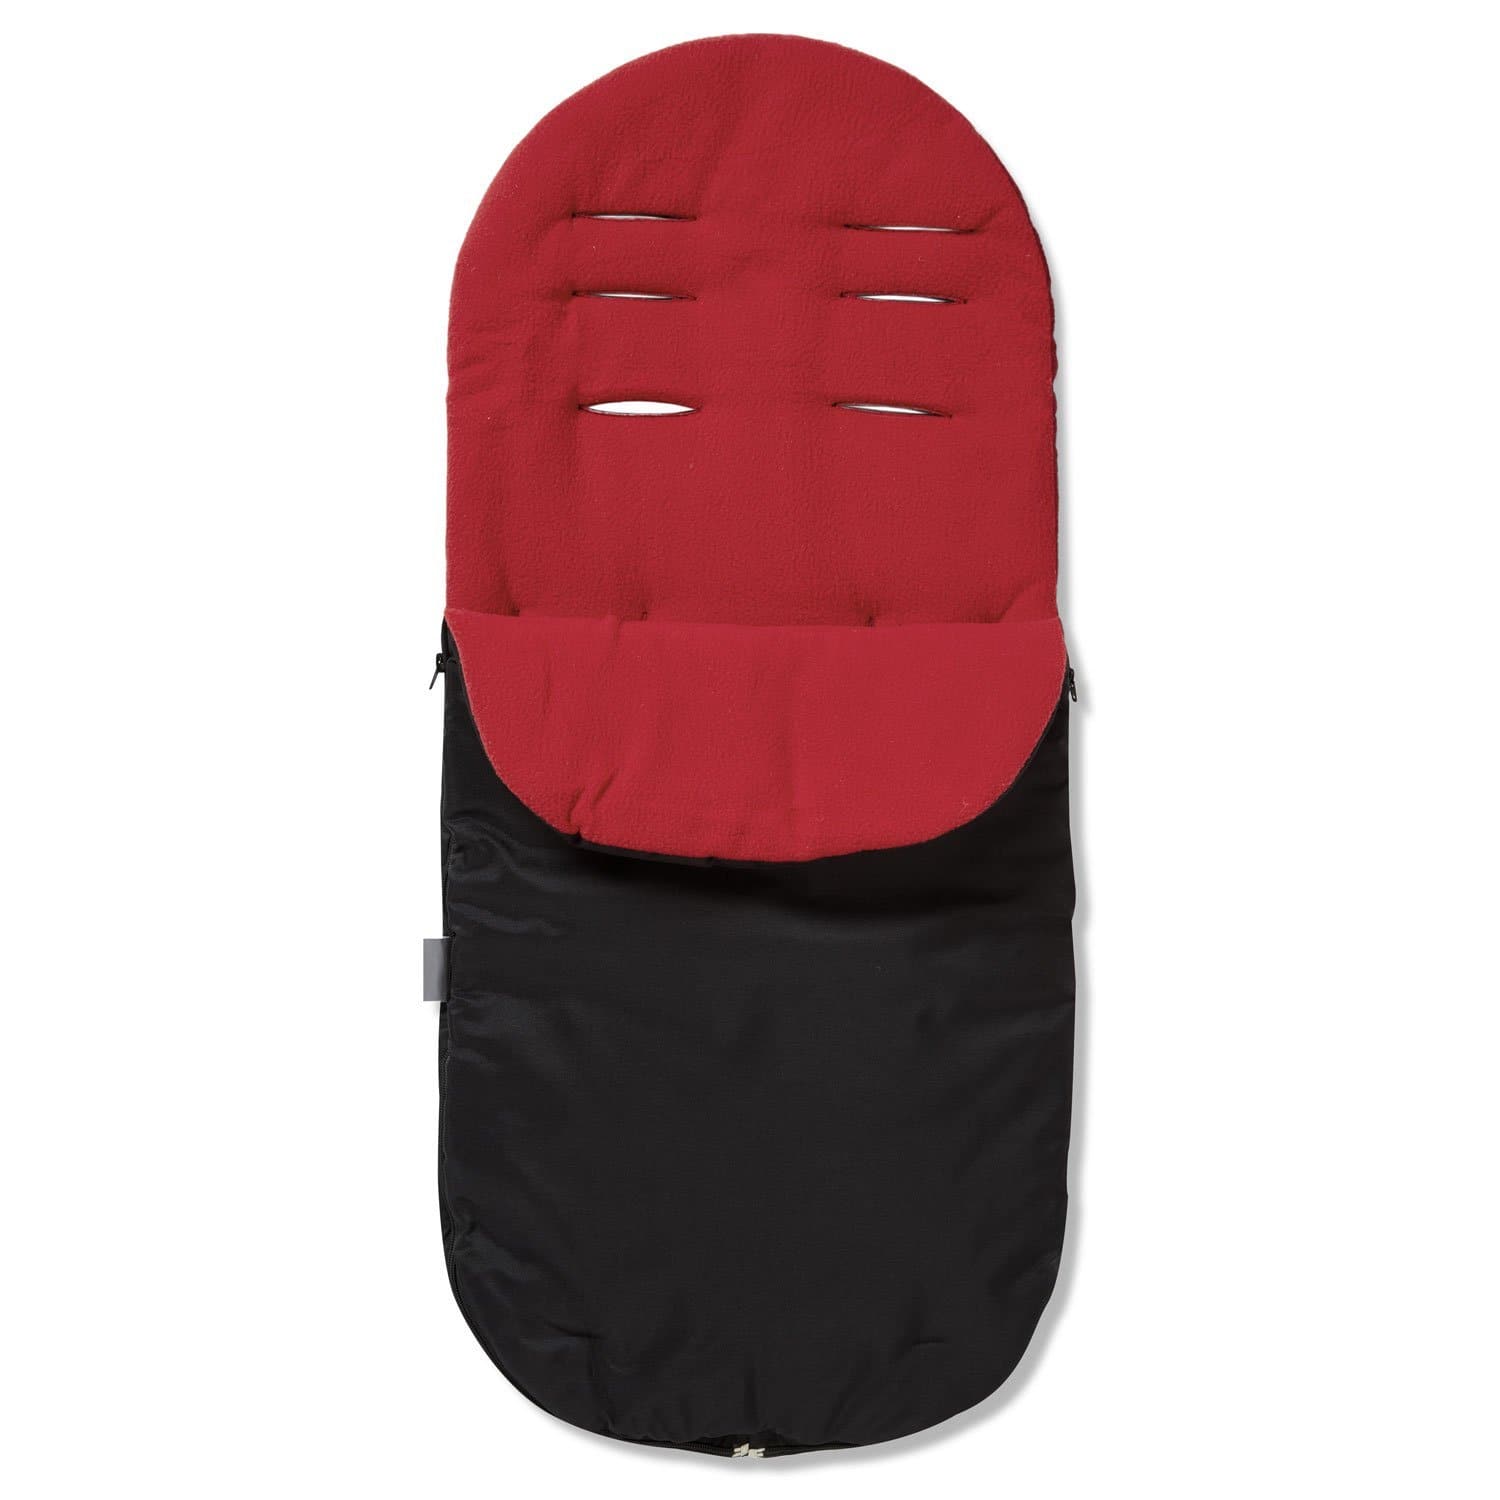 Footmuff / Cosy Toes Compatible with BabyDan - Red / Fits All Models | For Your Little One